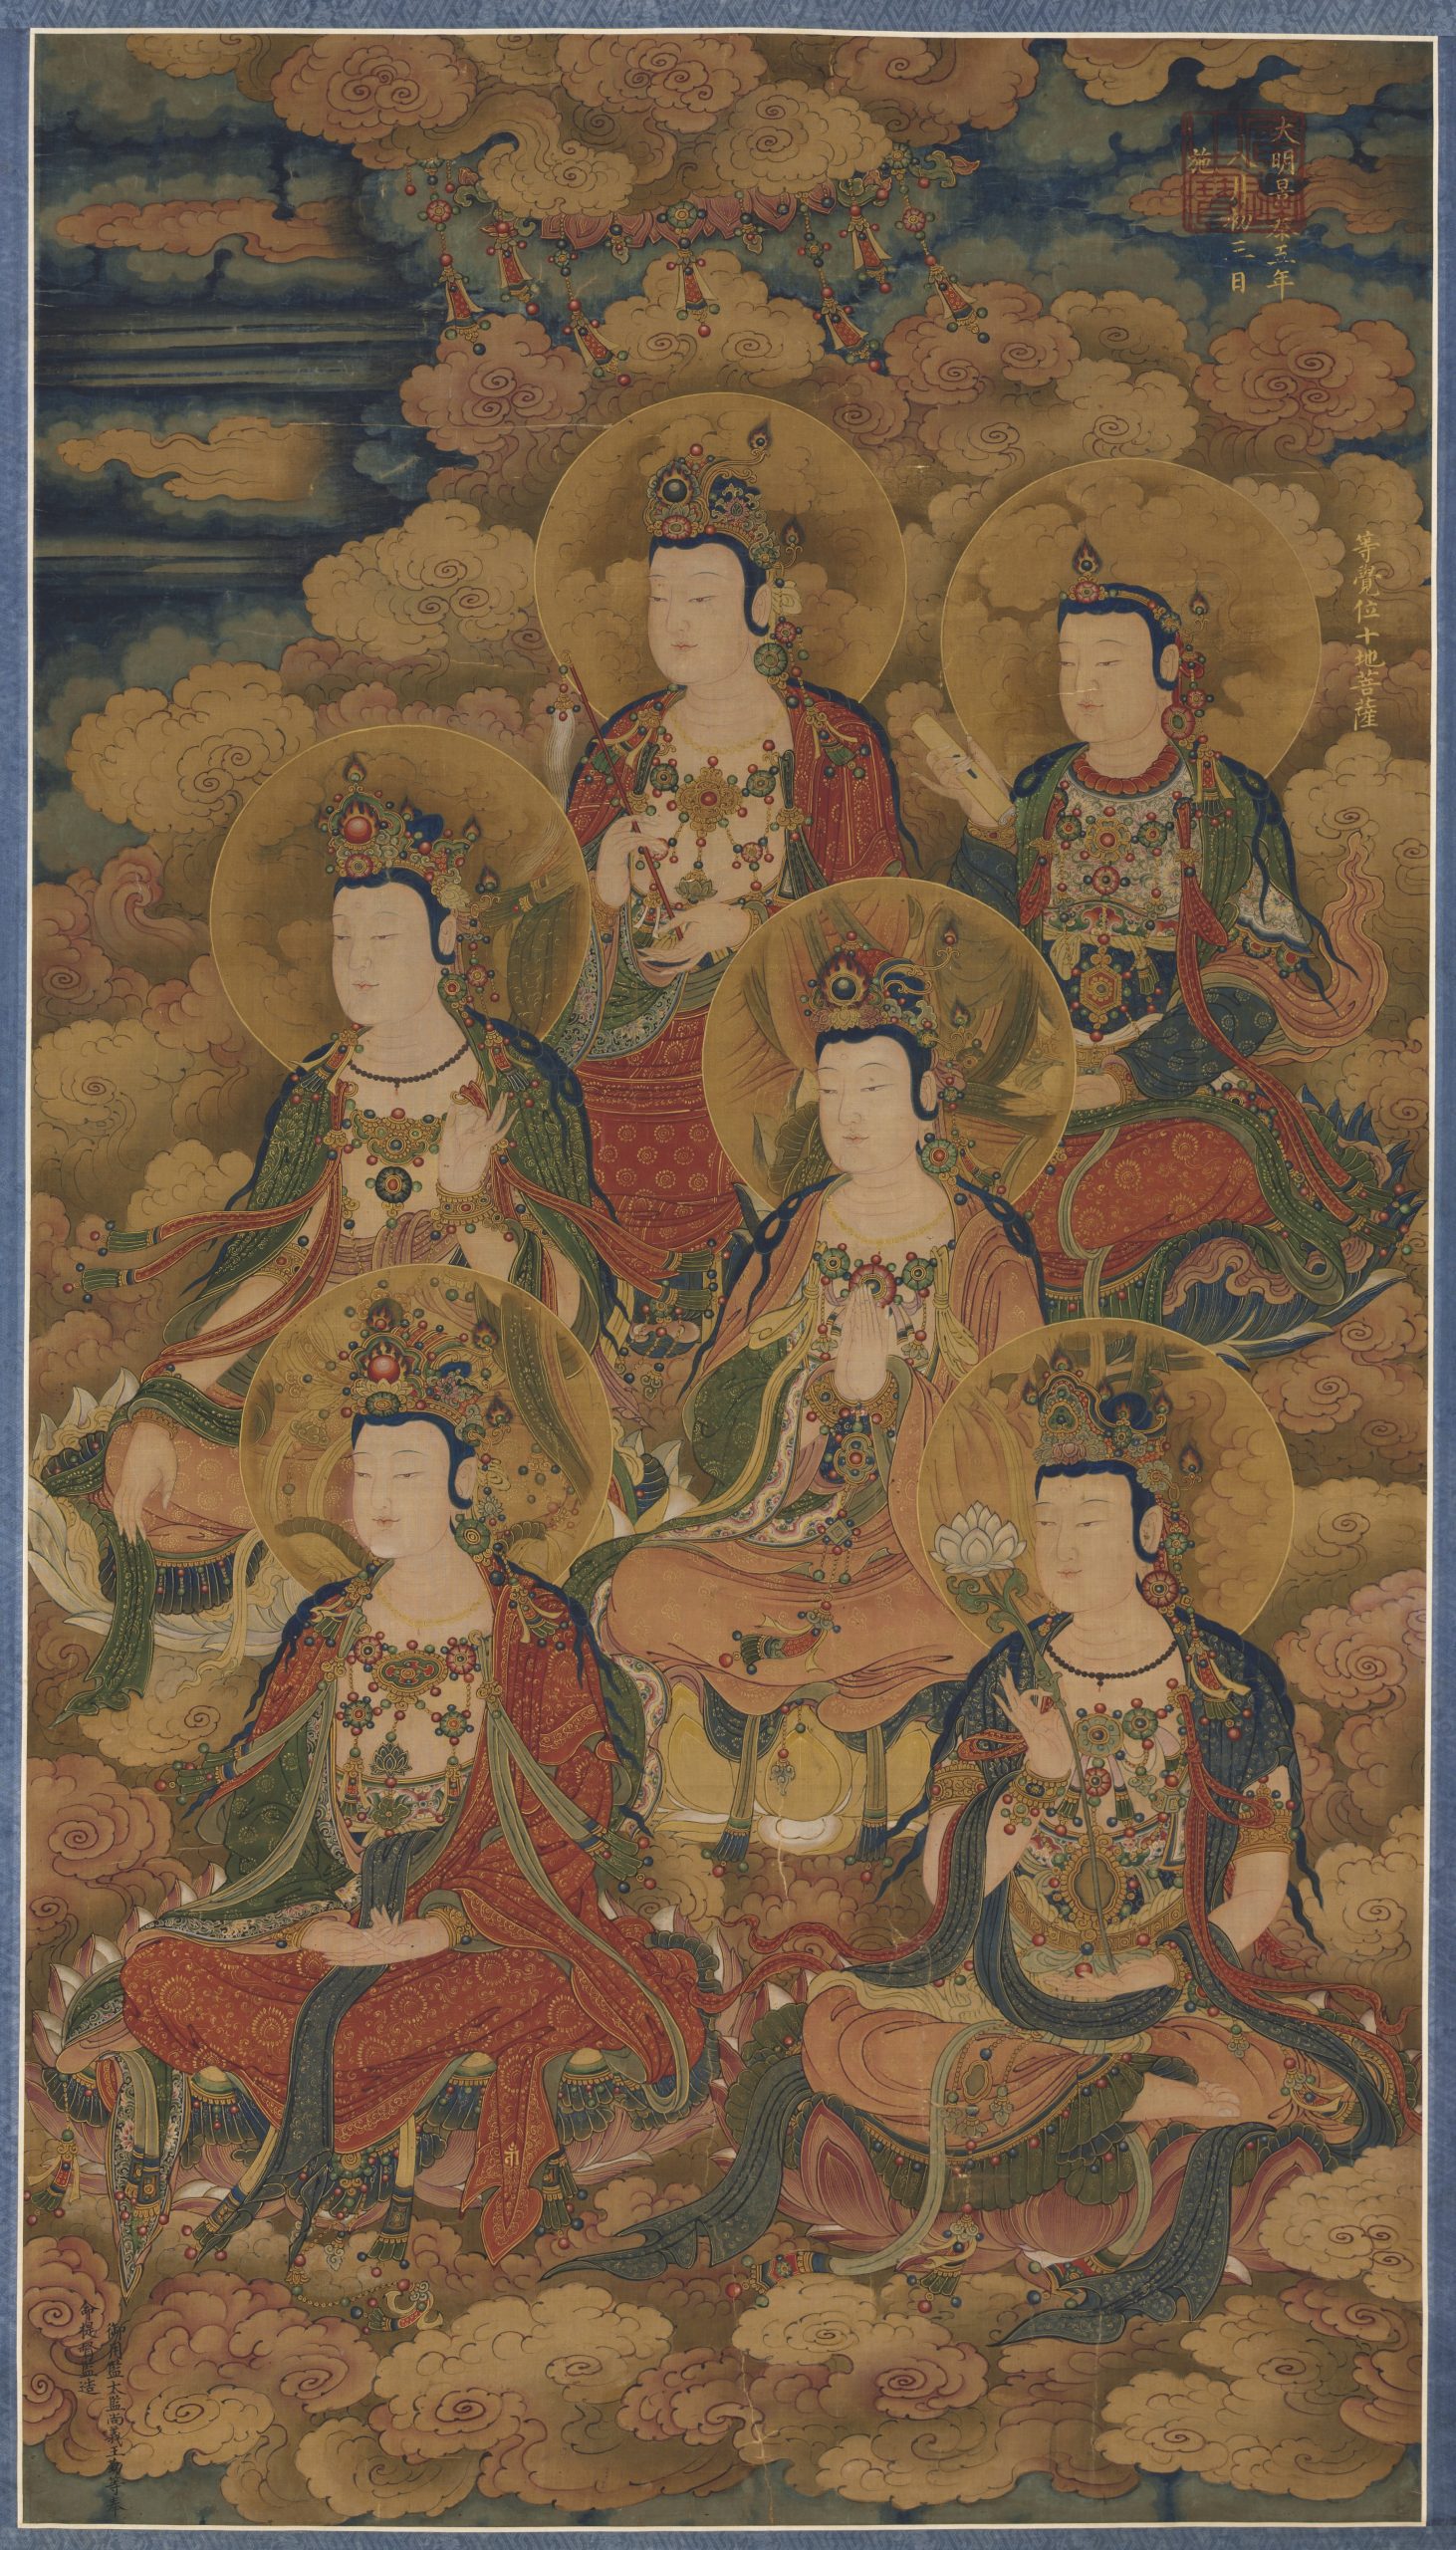 Bodhisattvas demonstrated the depth of their knowledge by living according to the precepts of Buddhist sutras.